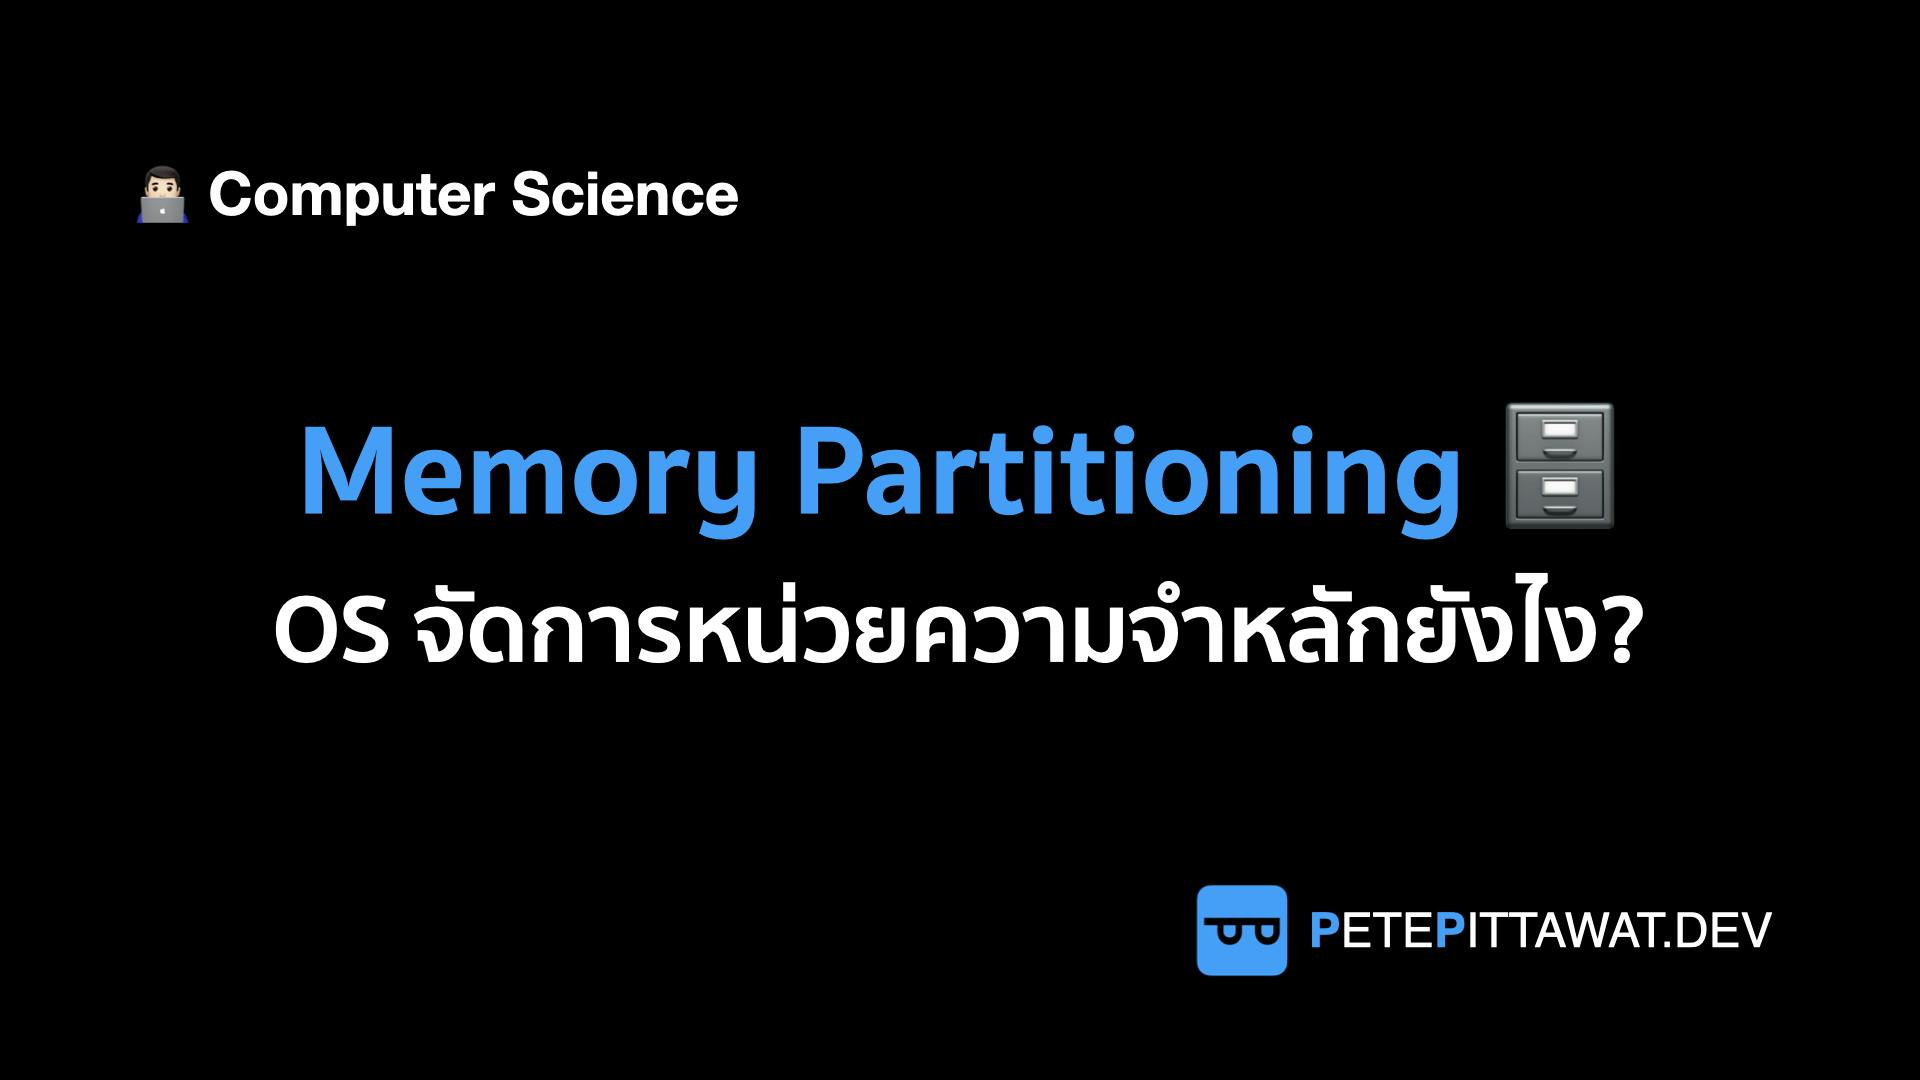 Cover Image for OS จัดการกับ Main Memory ยังไงนะ? - Memory Partitioning